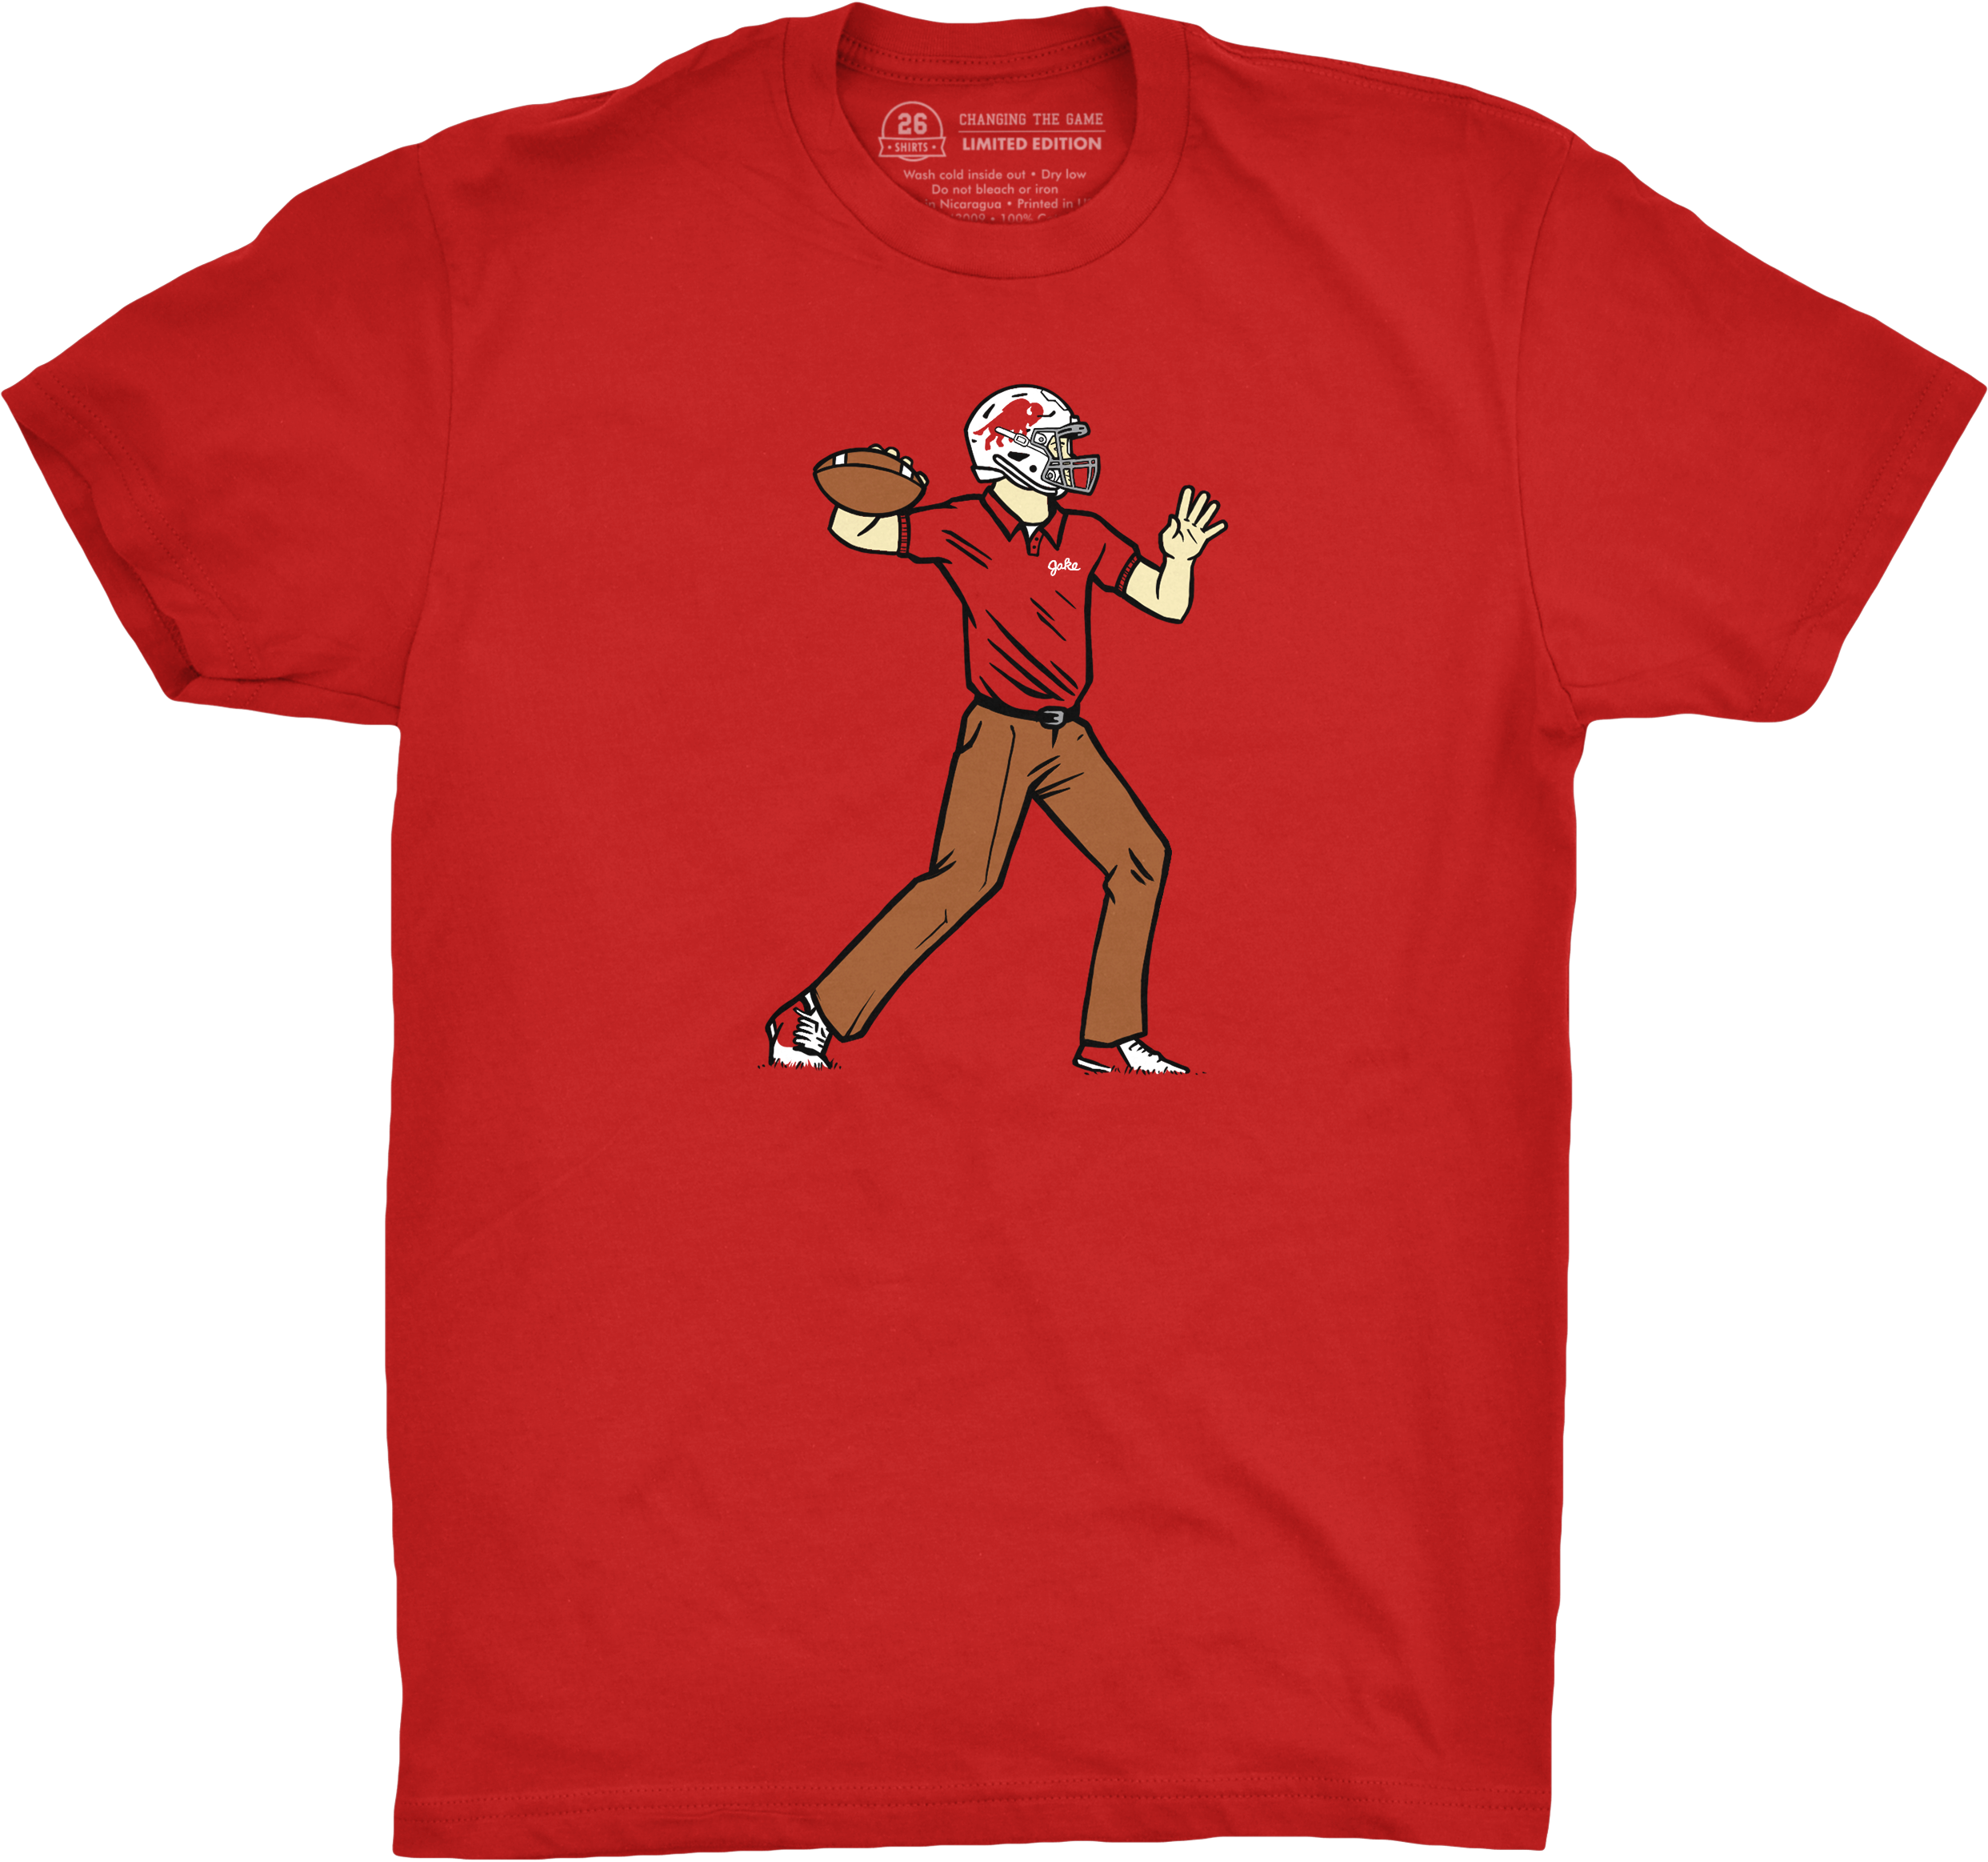 26 Shirts welcomes Jake Fromm to Buffalo Bills with 'Jake From